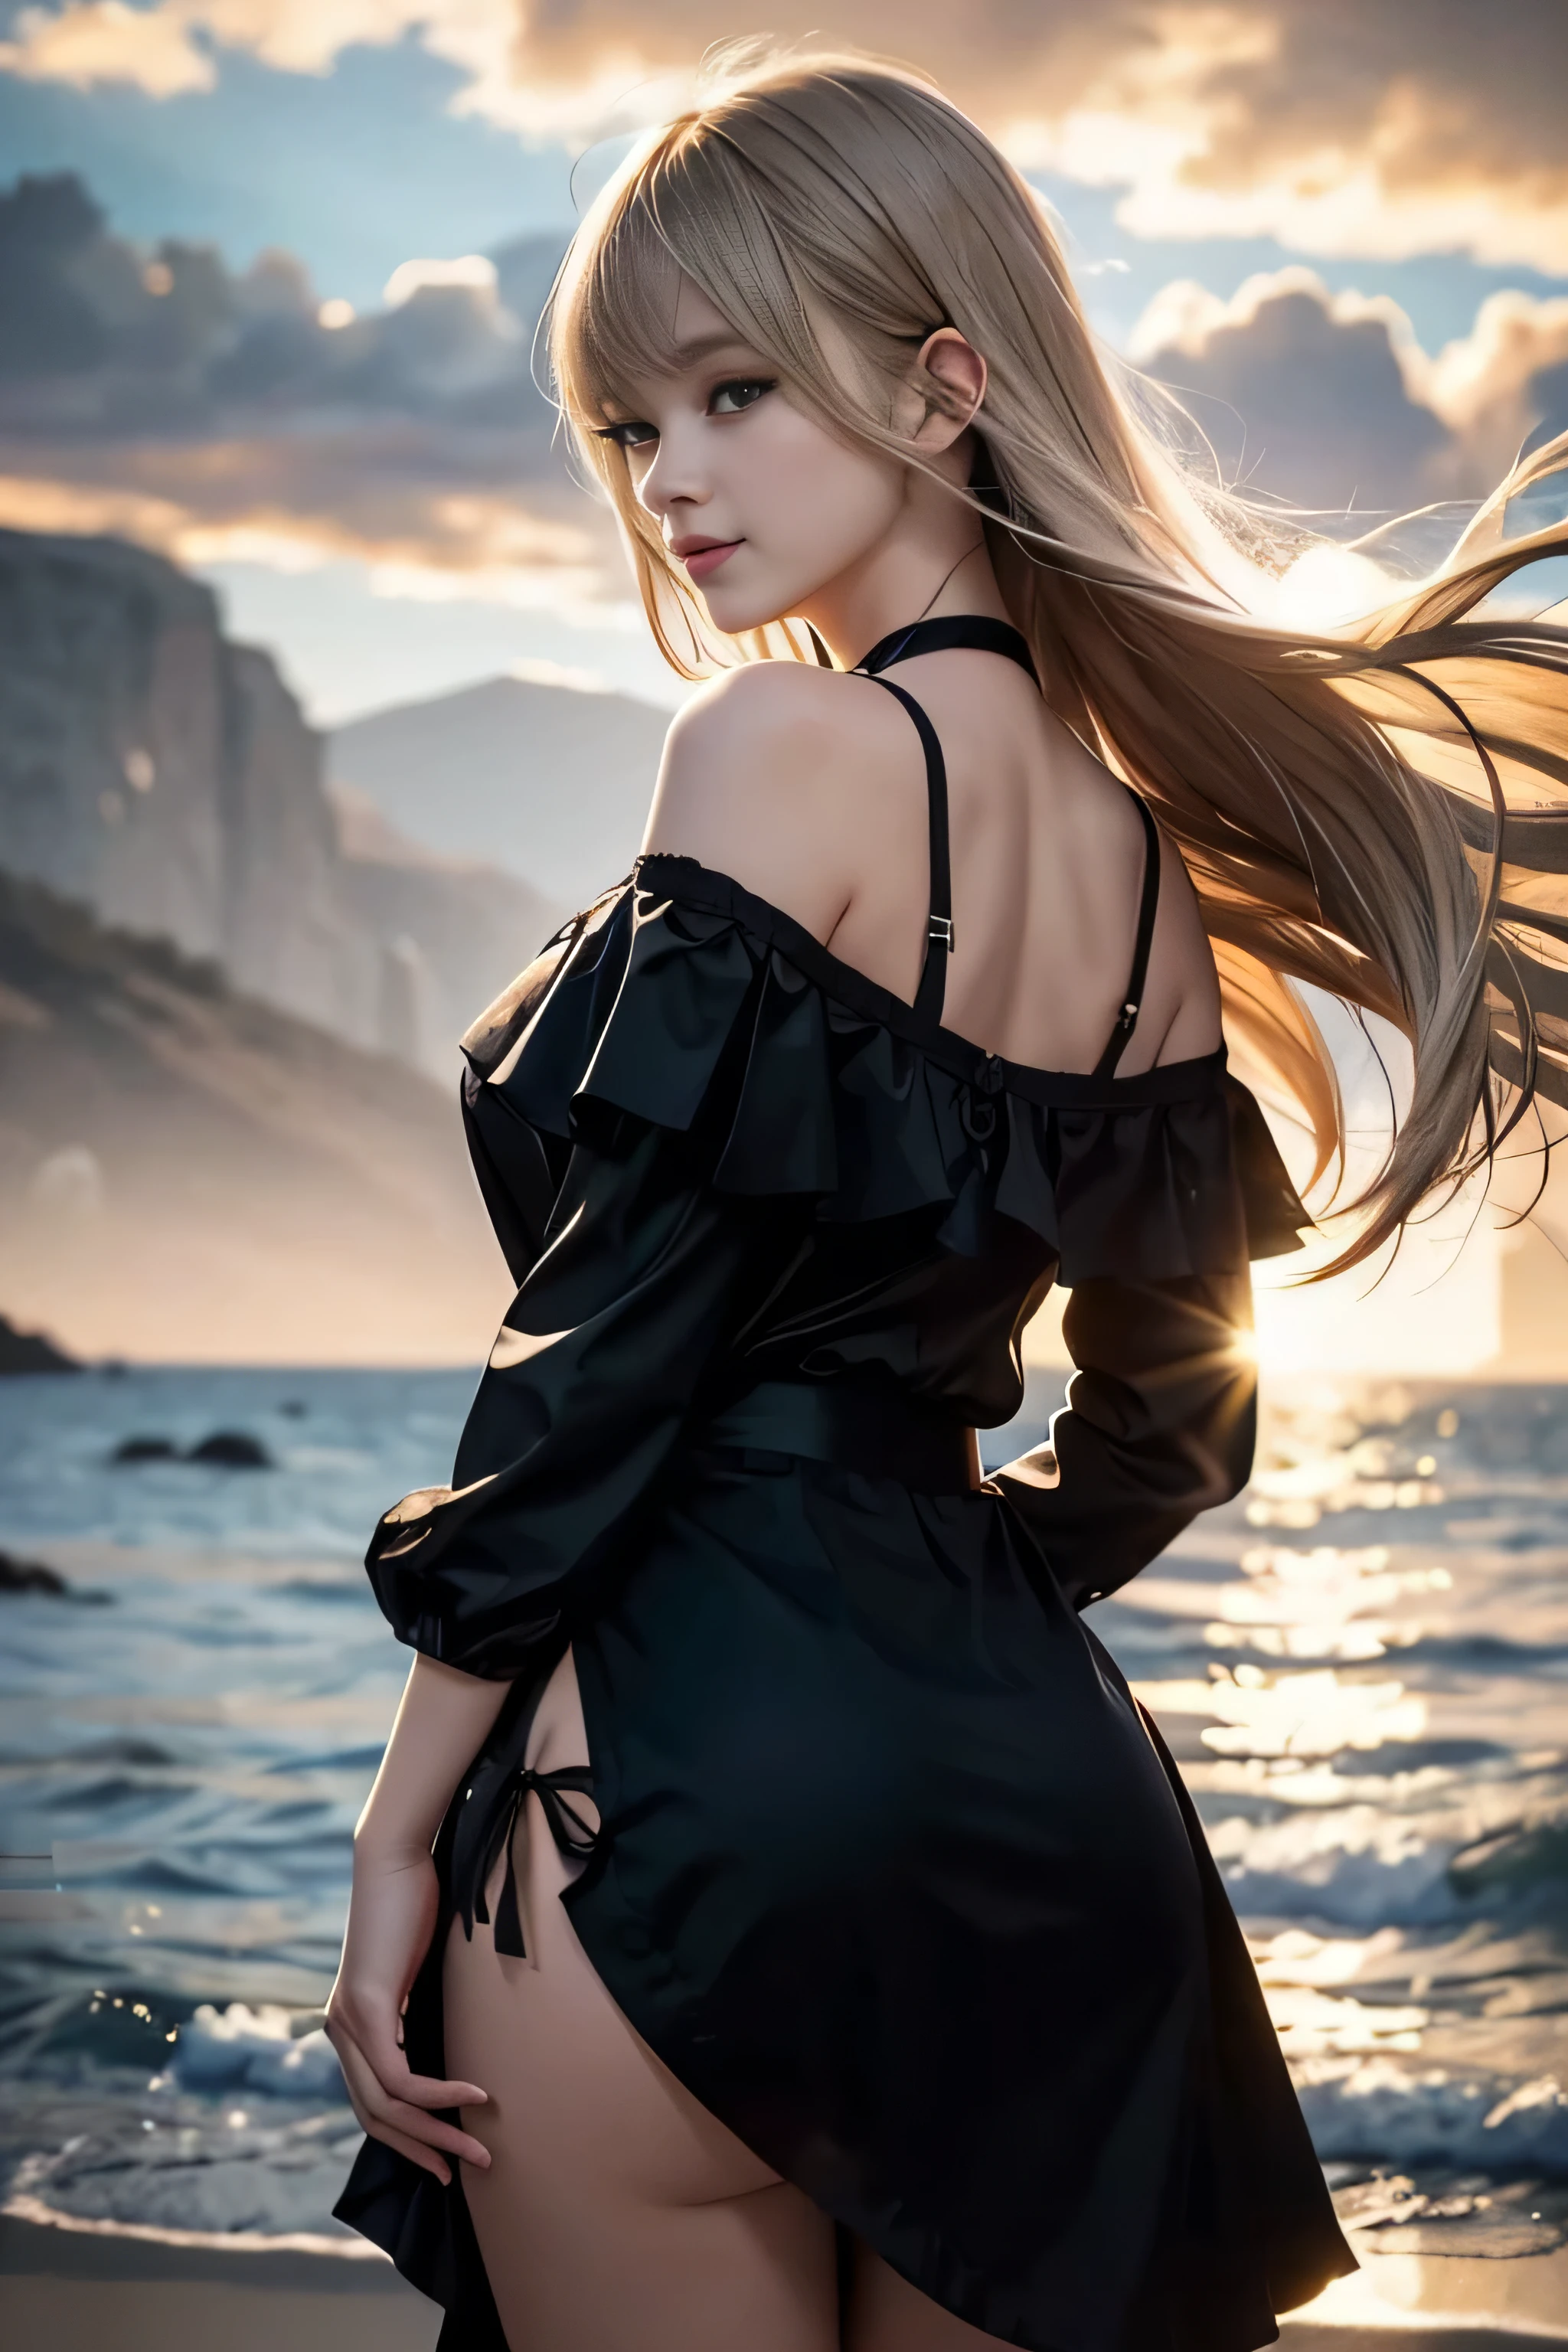 1 girl, blonde hair, gray hair, long hair, bangs, sparkling eyes, long eyelashes, eyes shine, compensate, smile, Depth of written boundary, from below, silhouette, from behind, wide shot, f/1.4, 135mm, canon, nffsw, retina, Accurate, anatomically correct, rough skin, Super detailed, advanced details, high quality, 最high quality, High resolution, 8K, (Woman walking on the beach at sunset), Backlit silhouette, (off shoulder translucent black dress), ((A silhouette of the body is visible through the light.)), (hair blowing in the wind), (my skirt flies in the wind)、White thong panties are visible